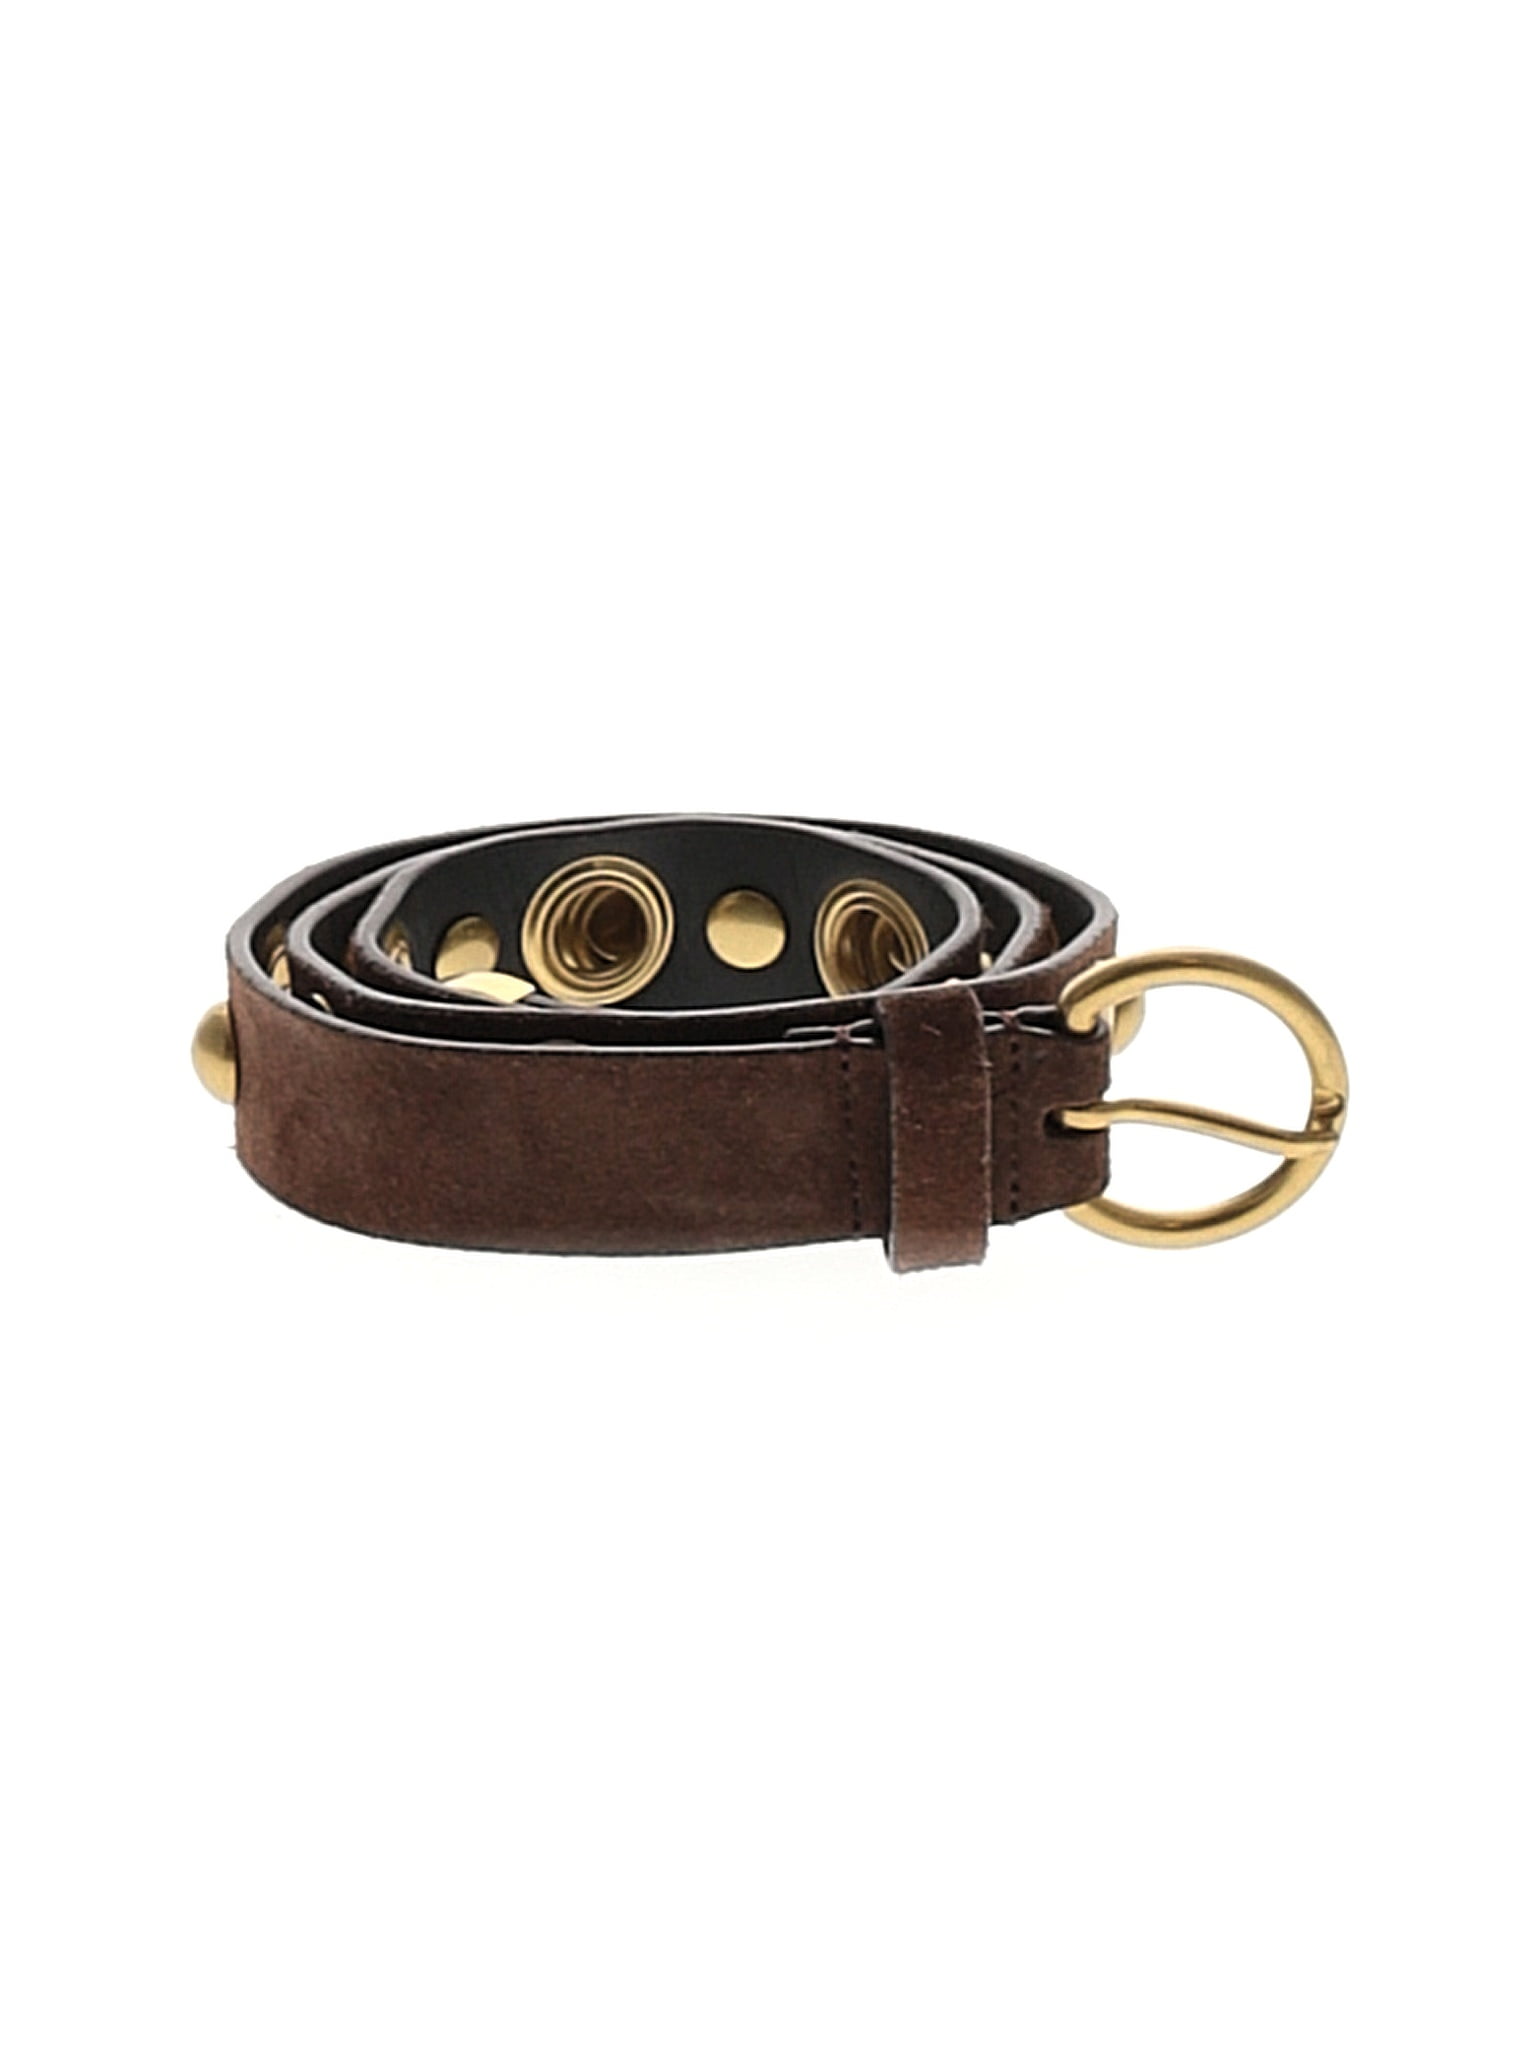 CAbi 100% Leather Solid Brown Leather Belt Size XS - 65% off | thredUP